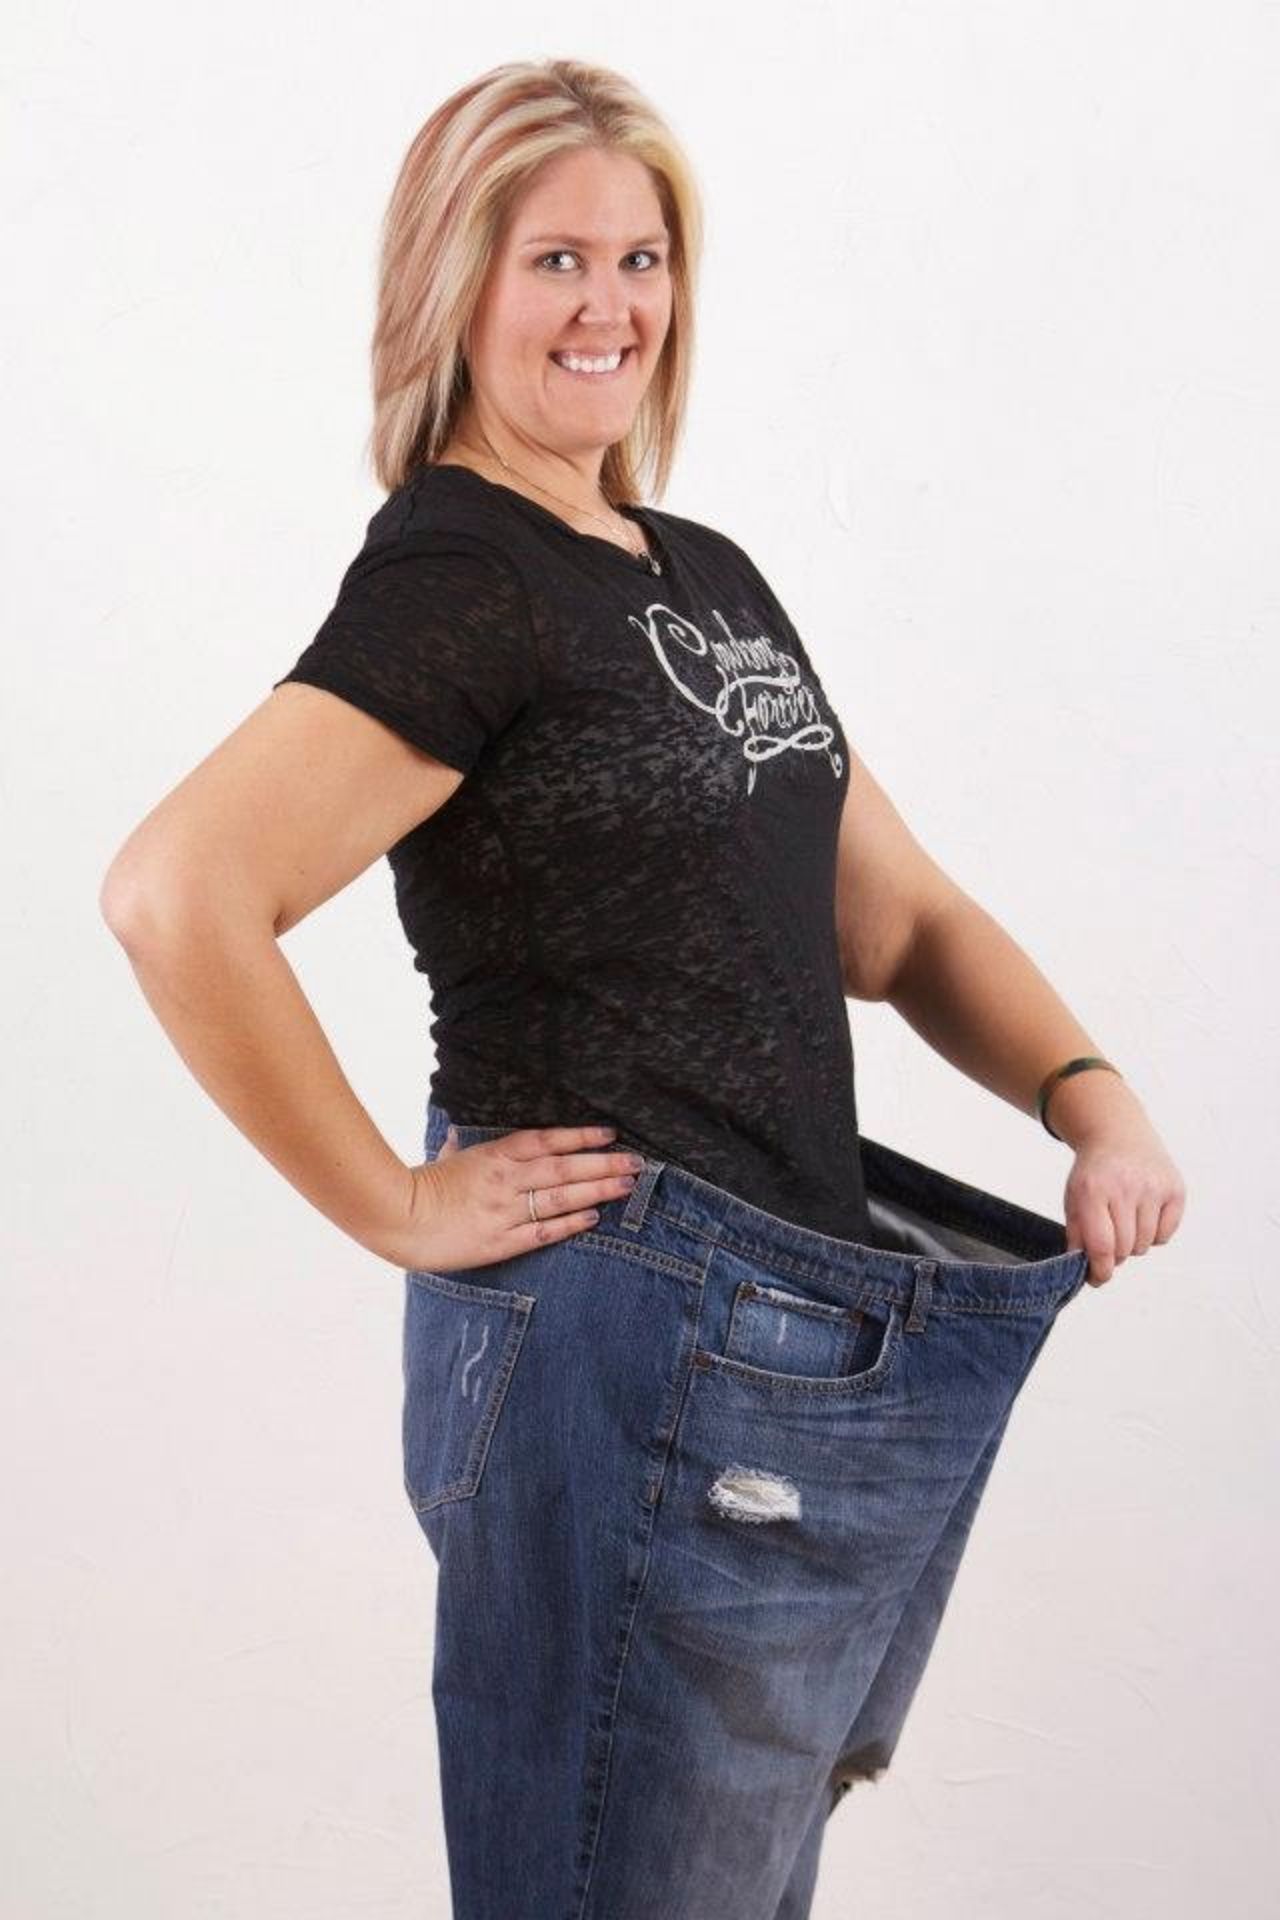 Tomsche used to wear a size 26 pant. Now she wears a size 14.